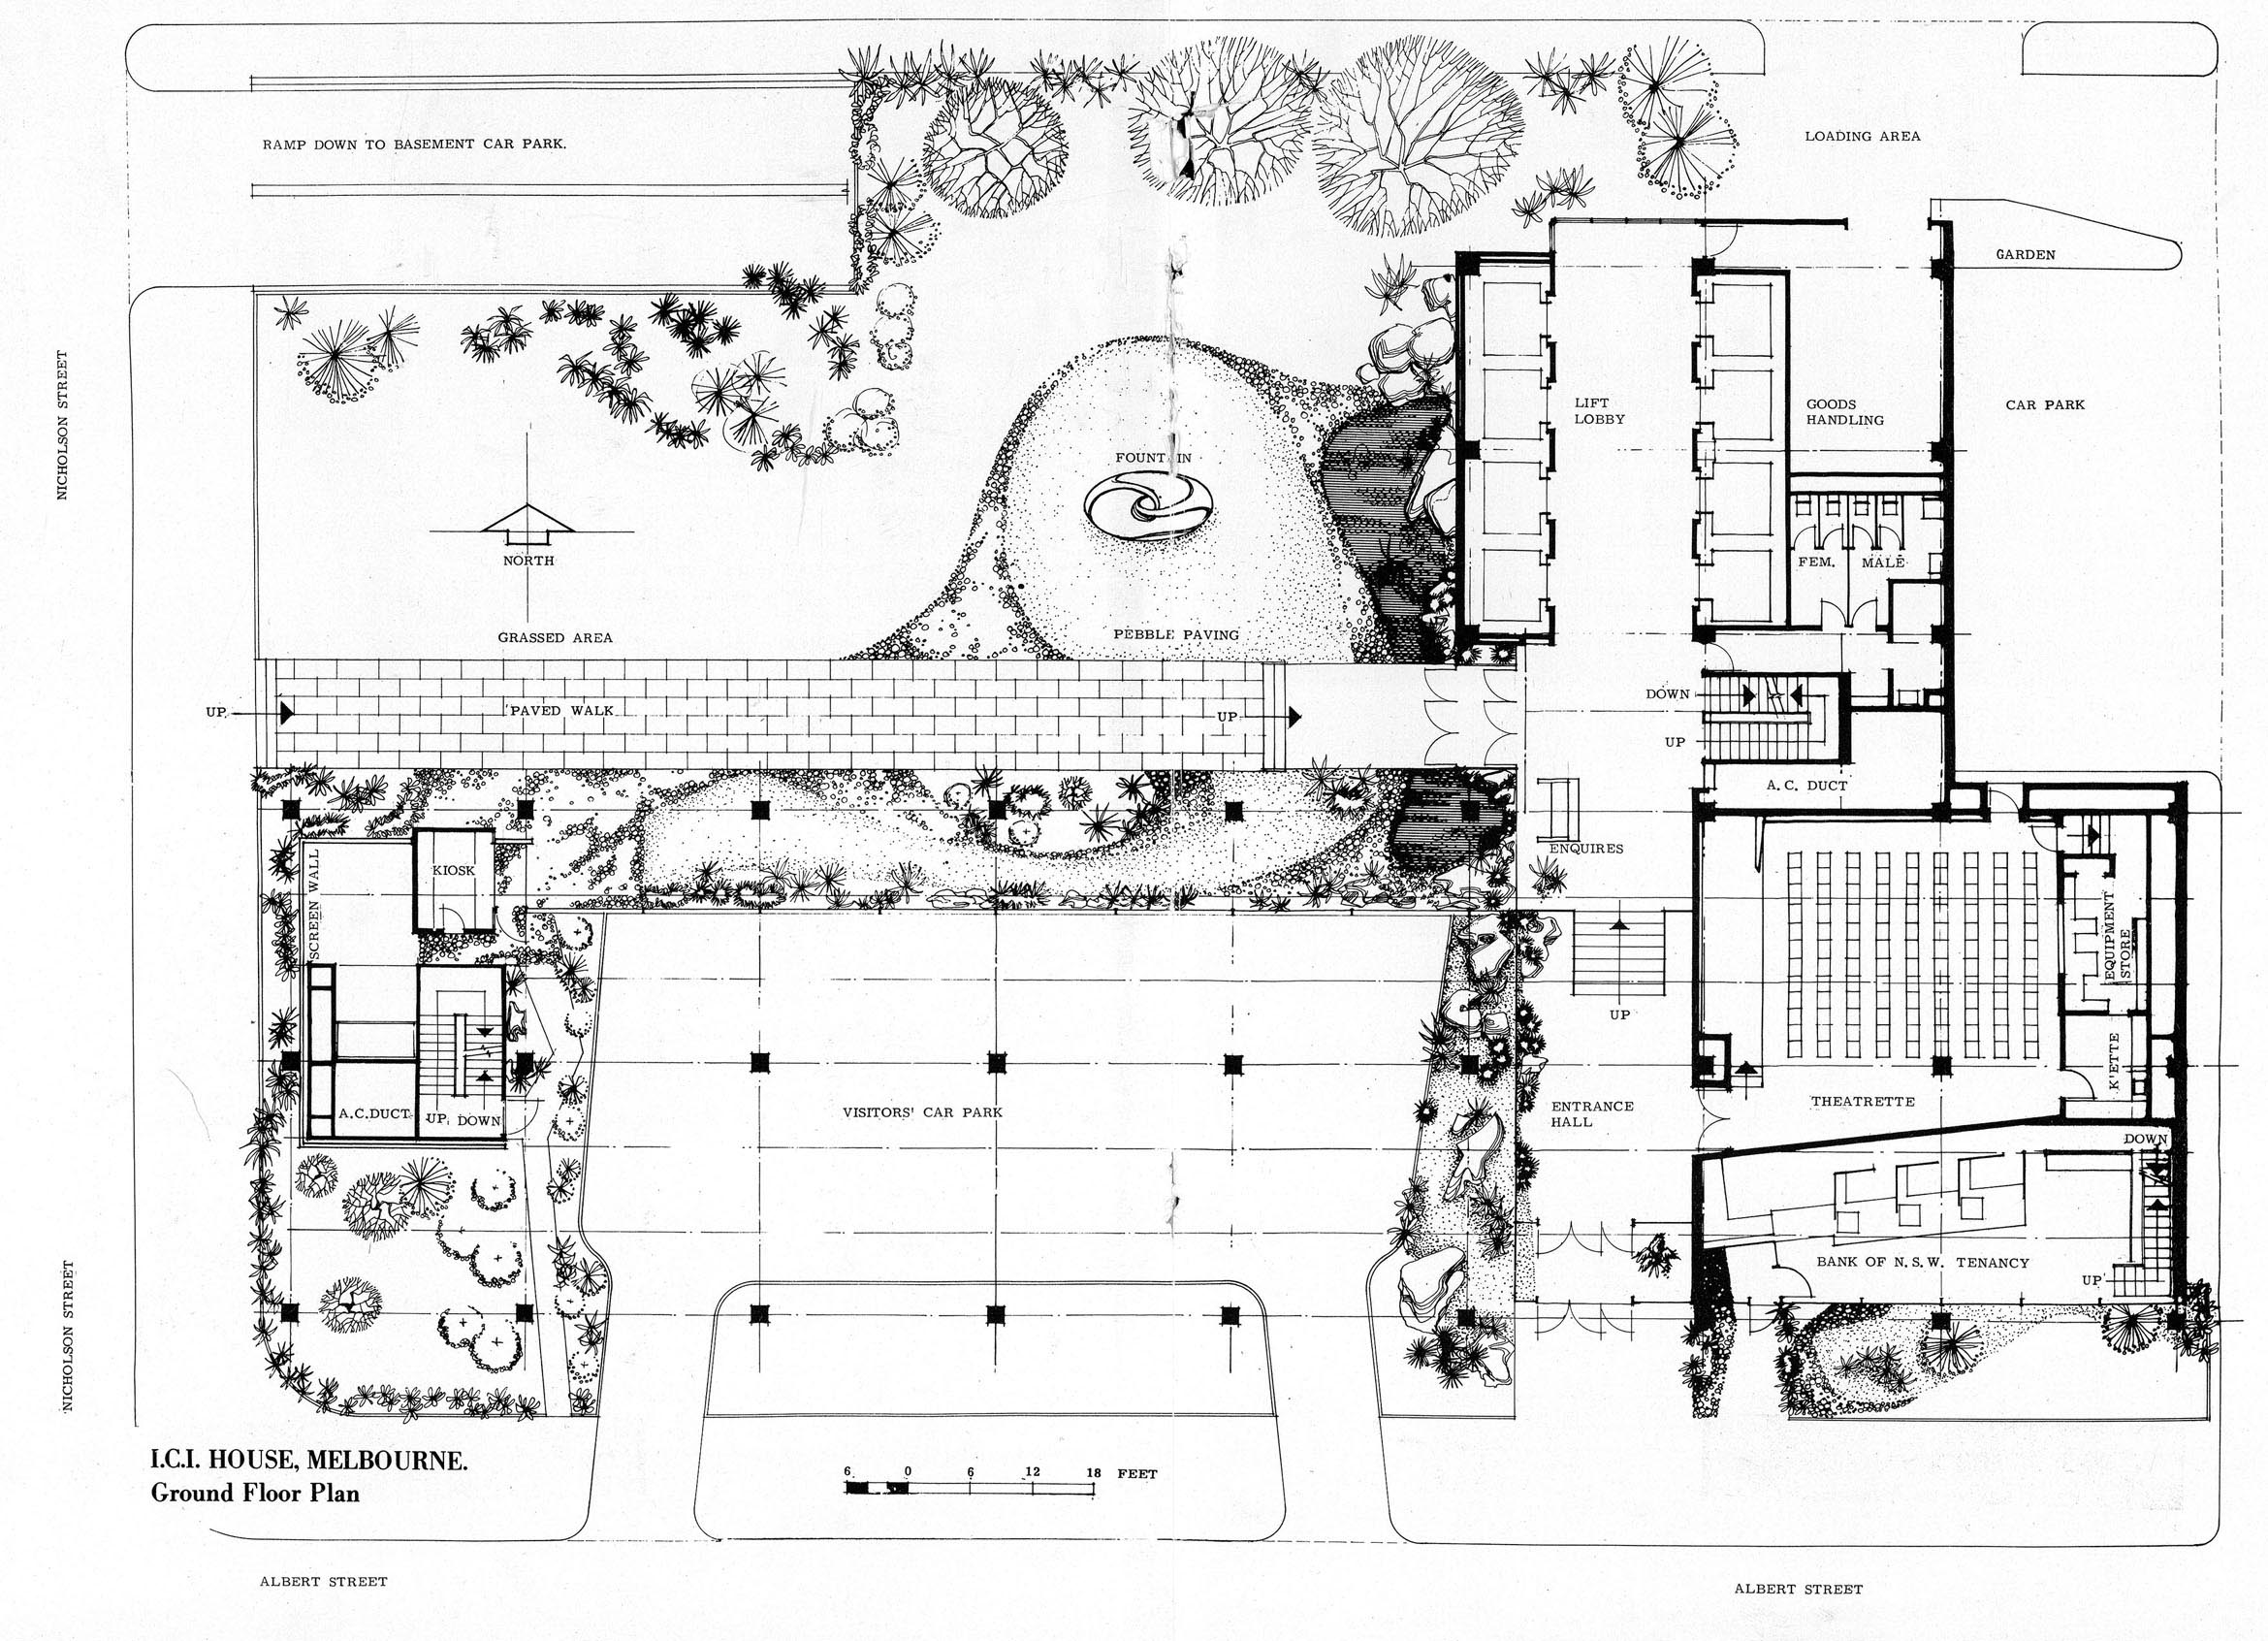 Plans for ICI House